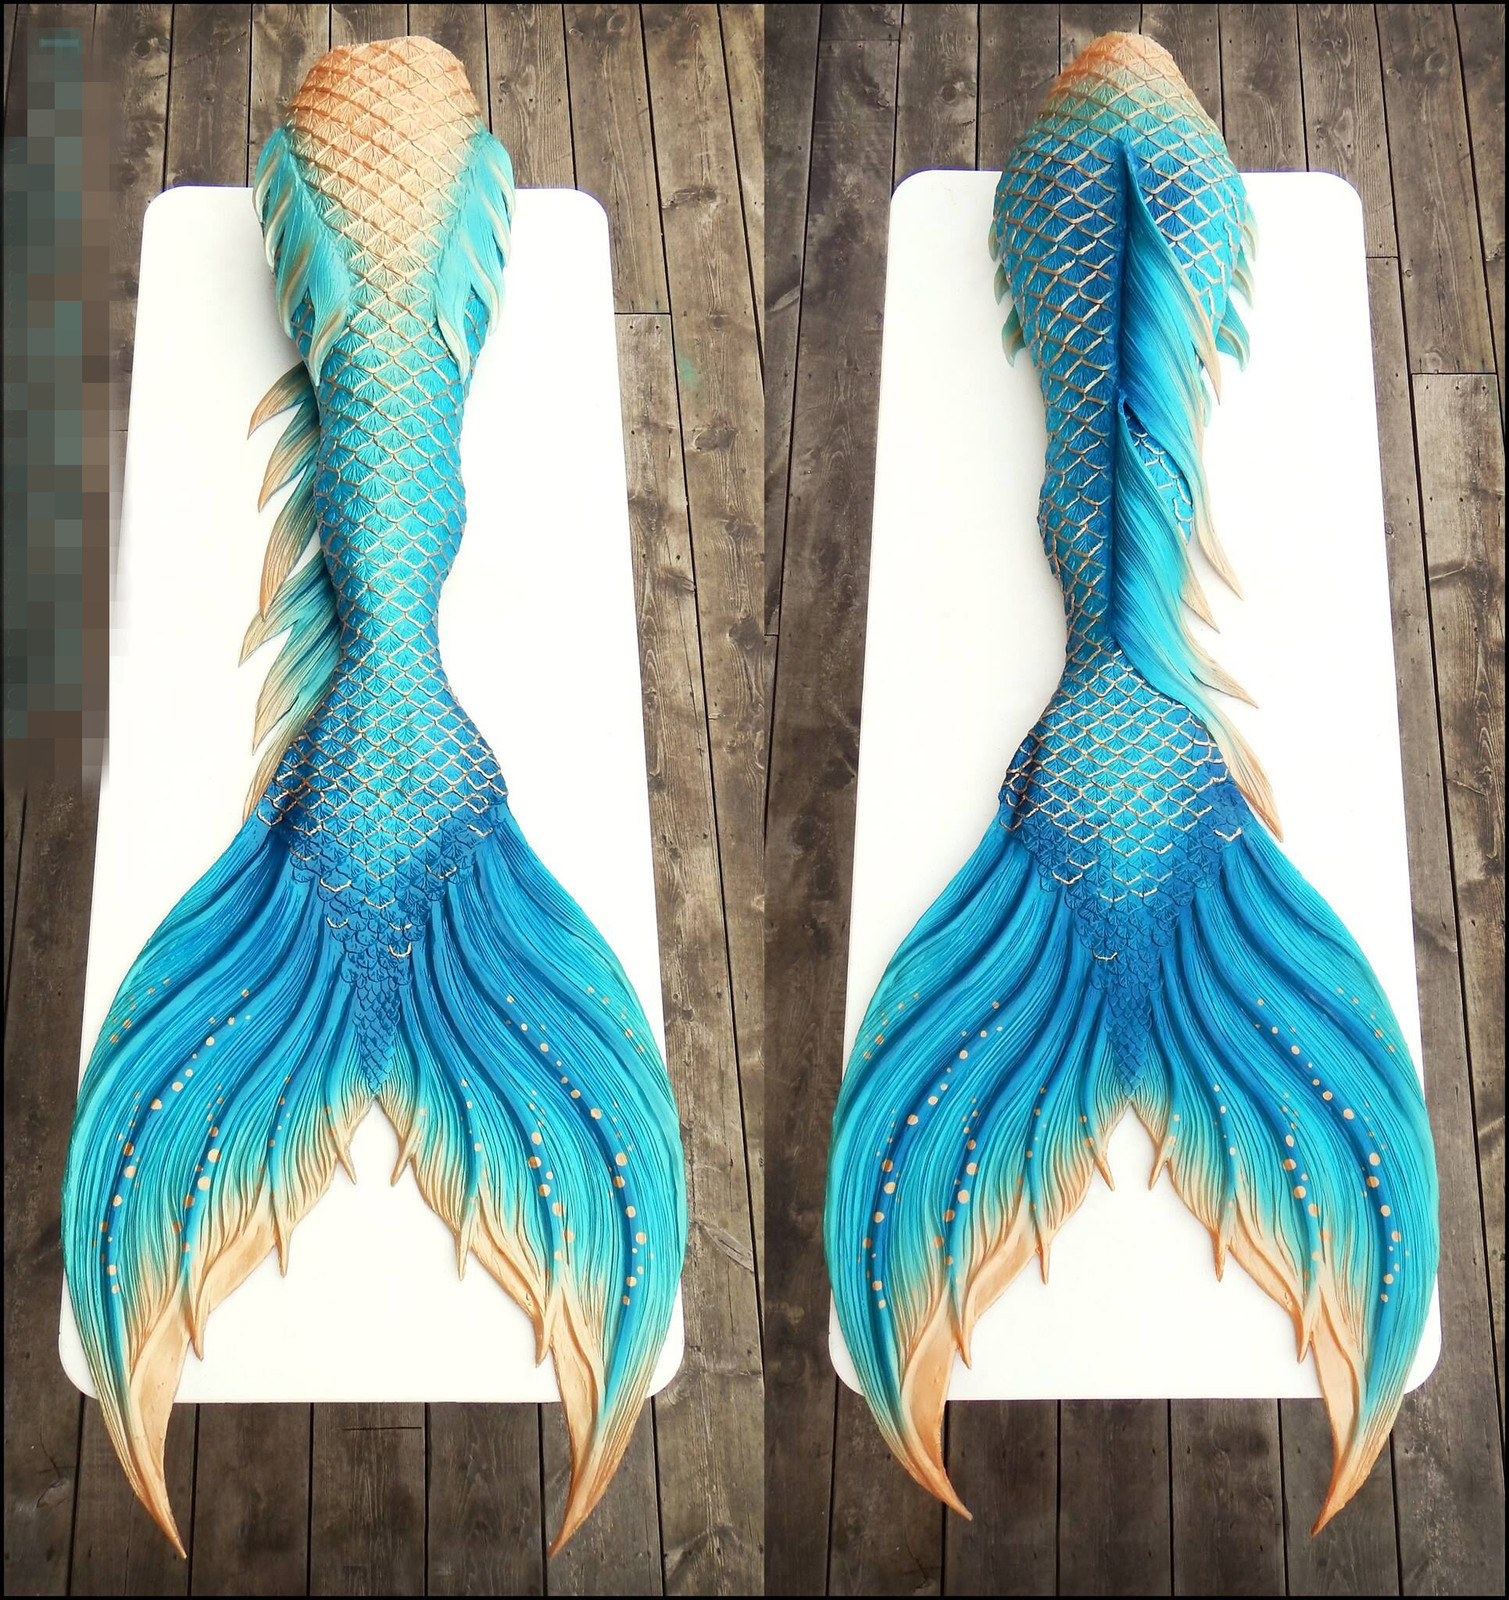 2018 Best Swimmable Mermaid Tails With Fins Monofin Kids Adult Cool ...